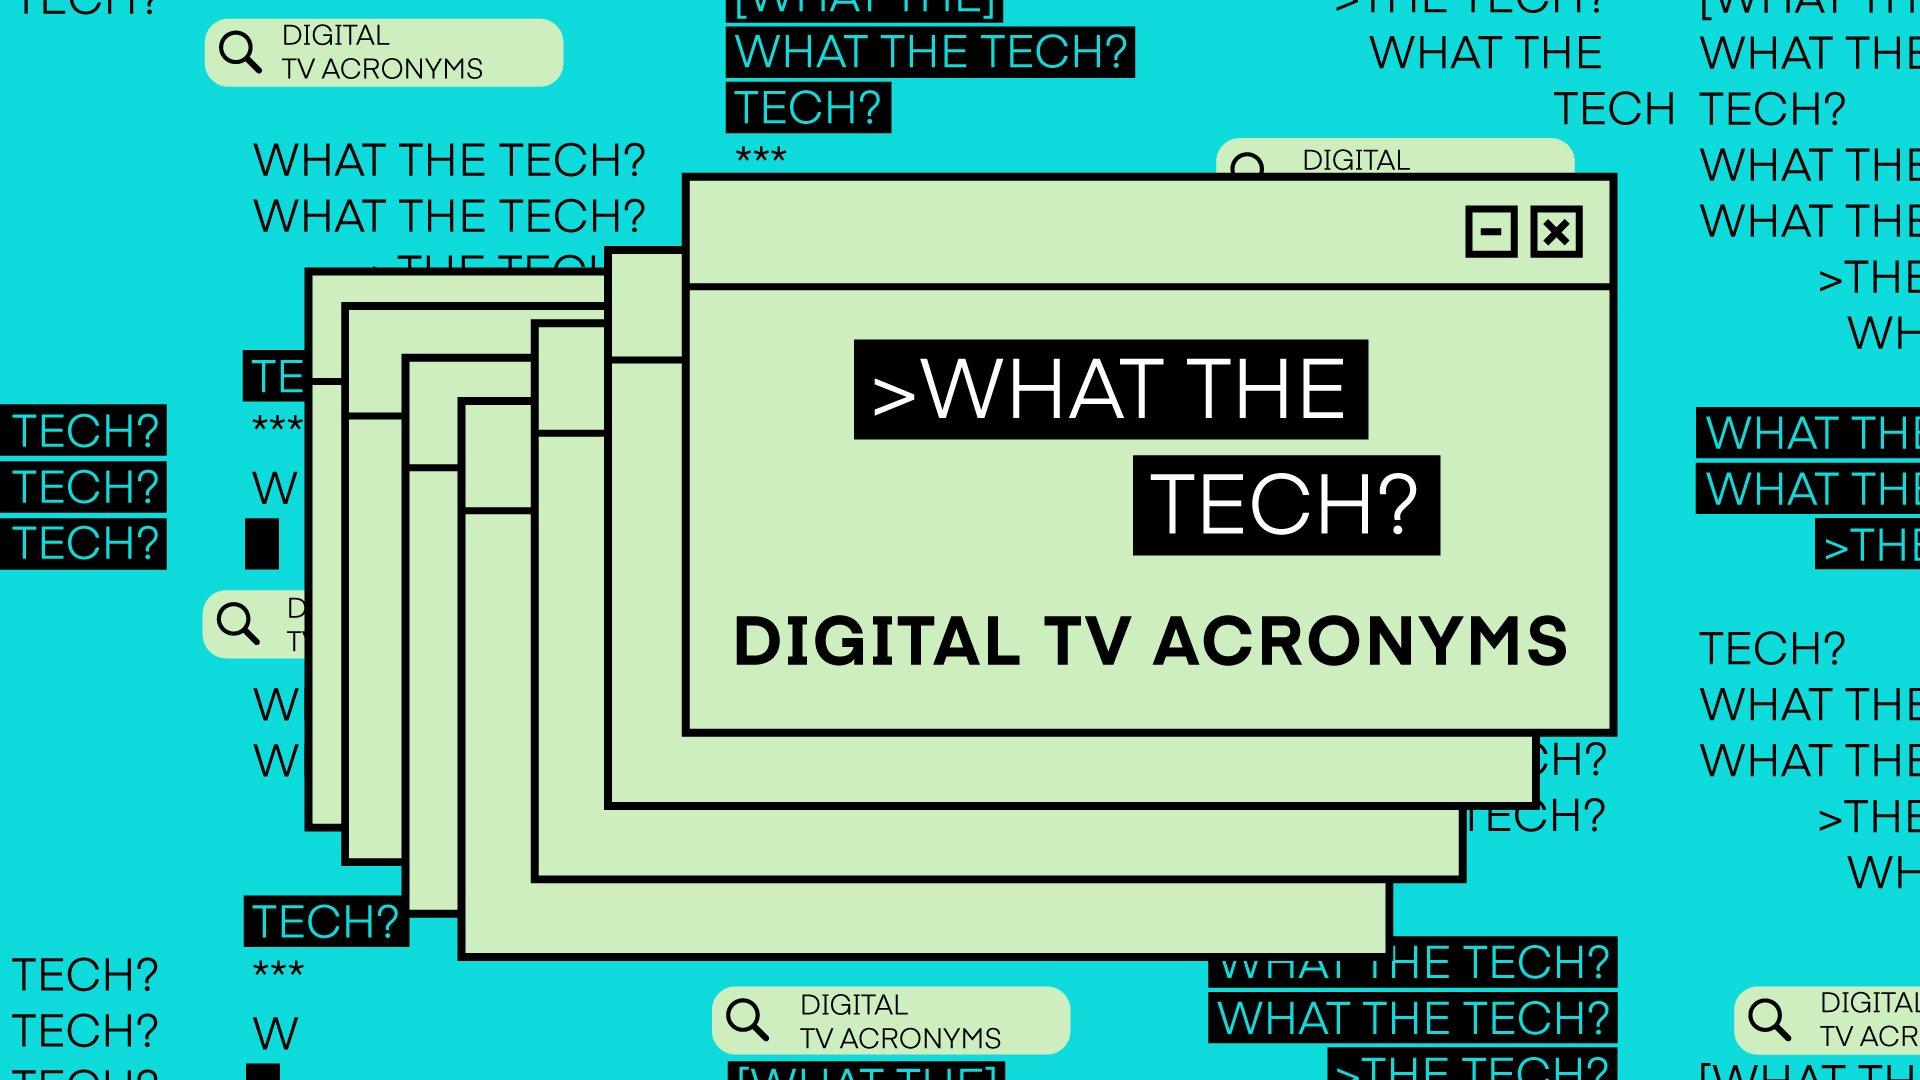 CTV, OTT, SVOD, AVOD, BVOD, FAST…What the Tech are all these digital TV acronyms?